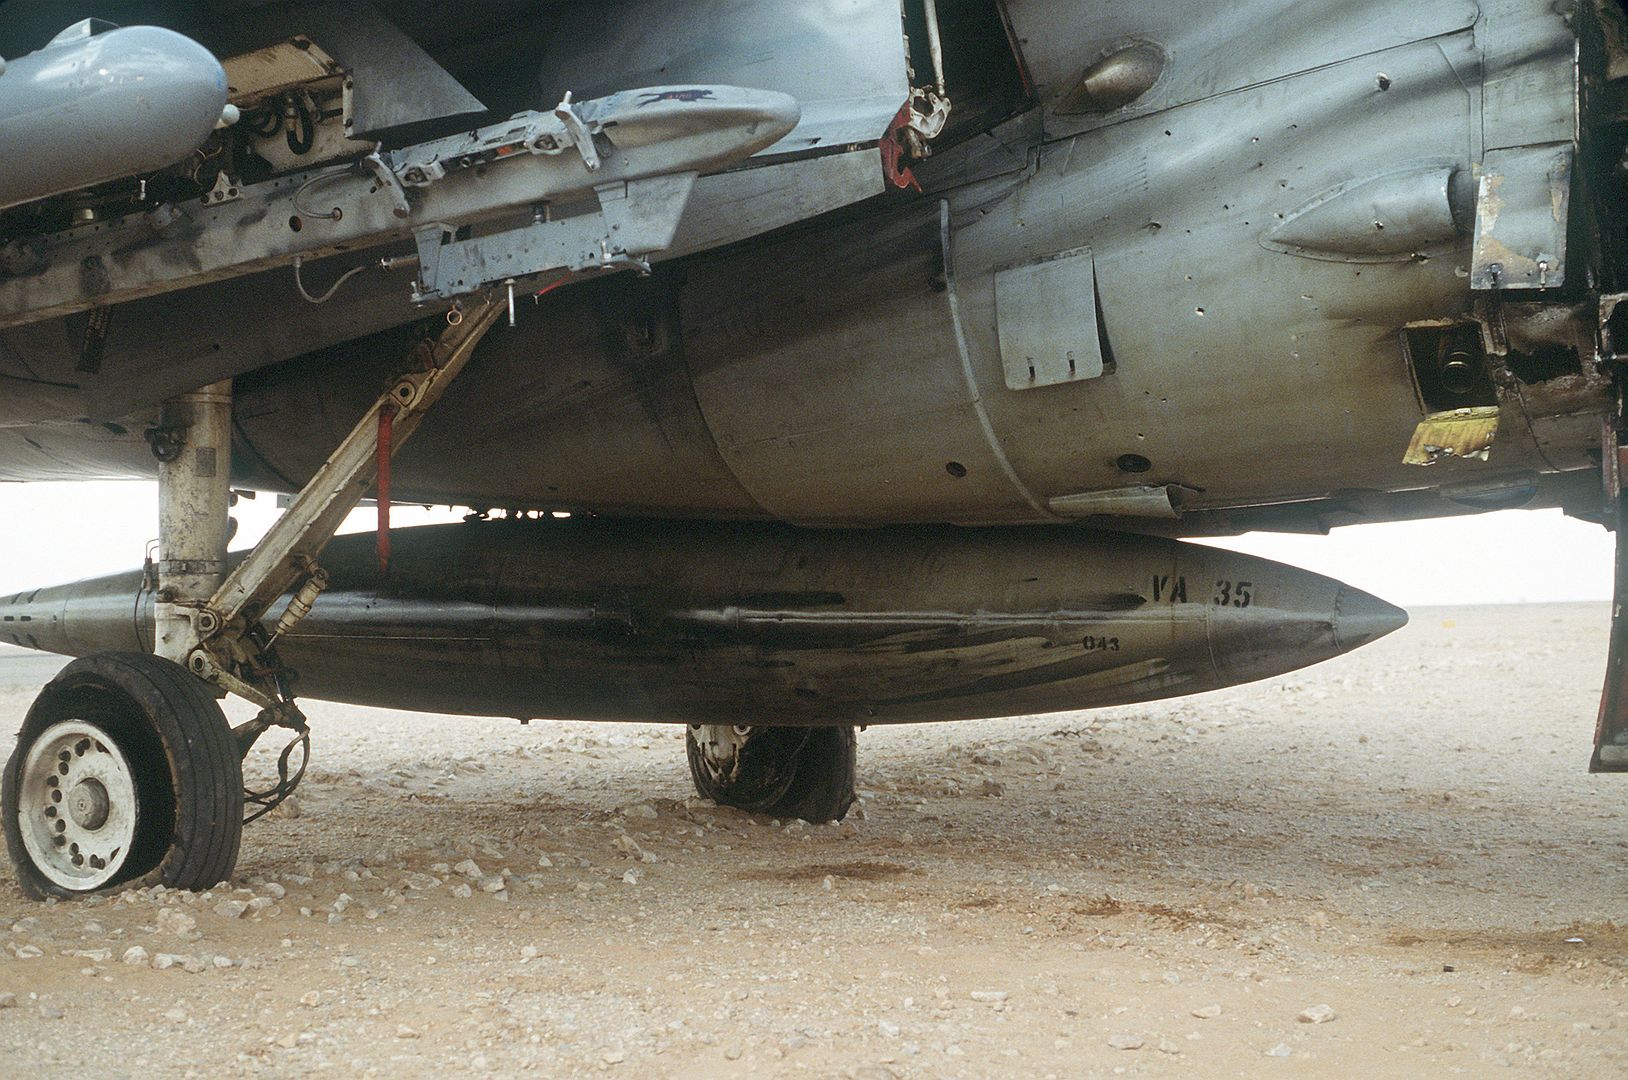 A 6E Intruder Attack Aircraft From Attack Squadron 35 Deployed From The Aircraft Carrier USS SARATOGA Shows Battle Damage From A Mission At The Start Of Operation Desert Storm 1